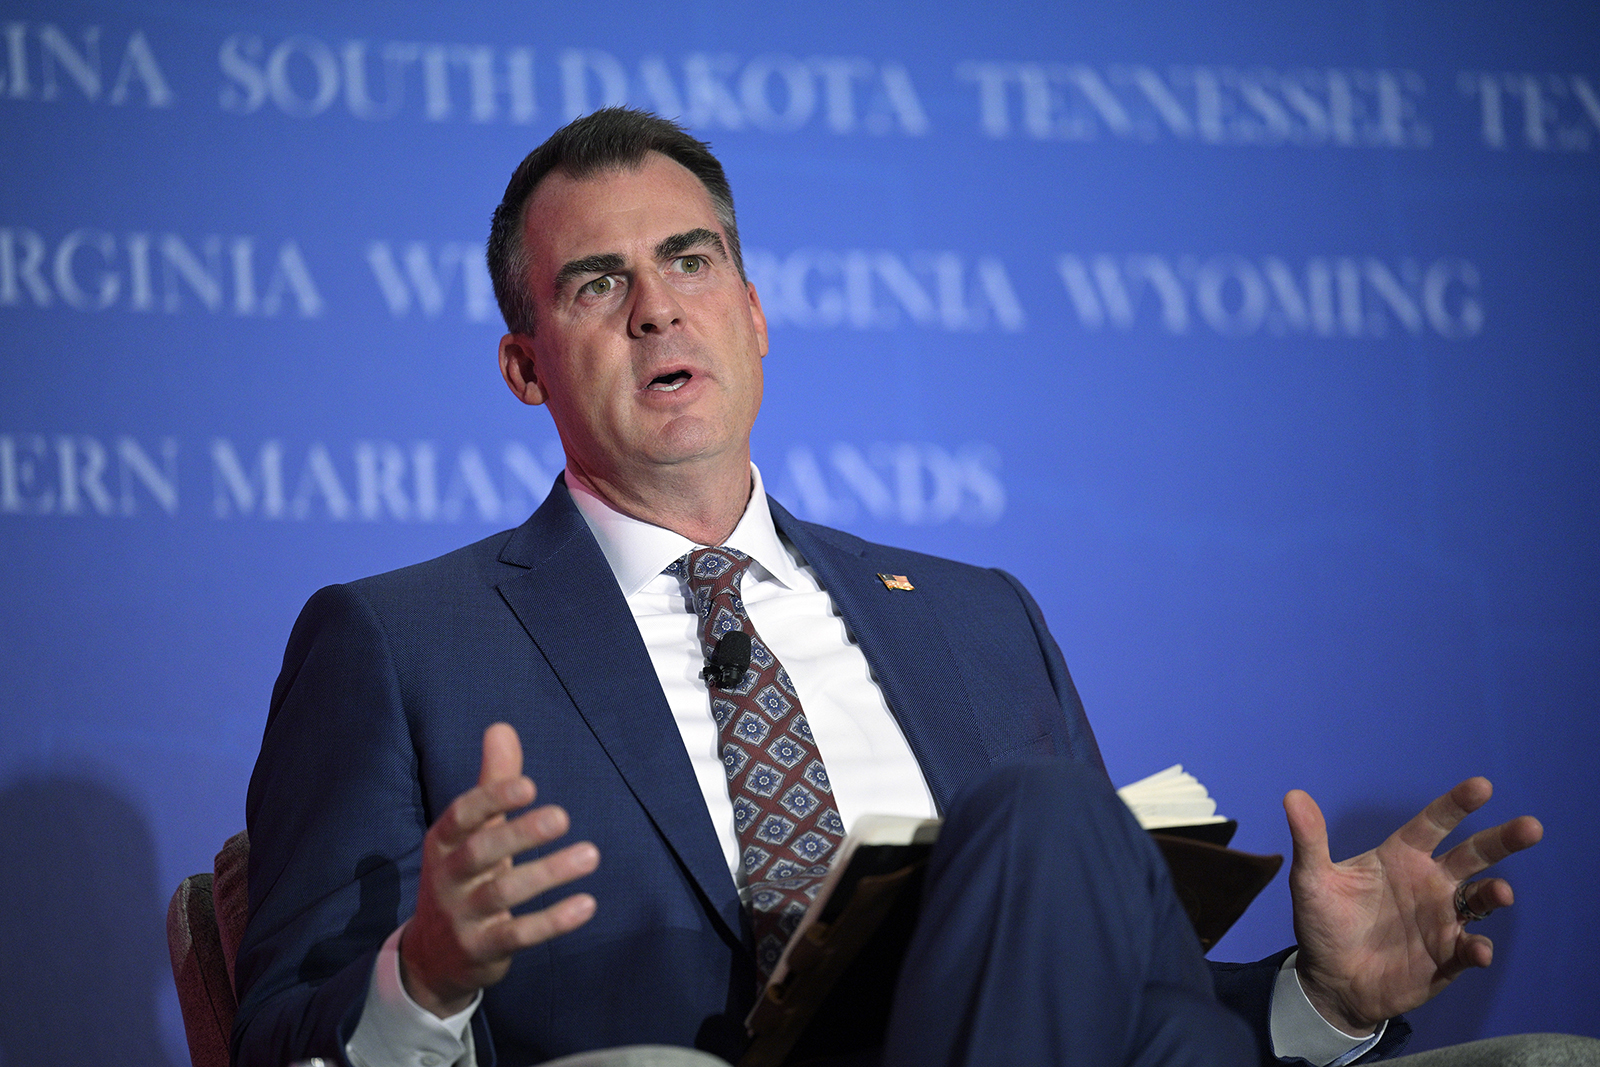 FILE - Oklahoma Gov. Kevin Stitt answers a question while taking part in a panel discussion during a Republican Governors Association conference, Wednesday, Nov. 16, 2022, in Orlando, Fla. On Monday, July 31, 2023, a group of parents, faith leaders and a public education nonprofit sued to stop Oklahoma from establishing and funding what would be the nation’s first religious public charter school. (AP Photo/Phelan M. Ebenhack, File)